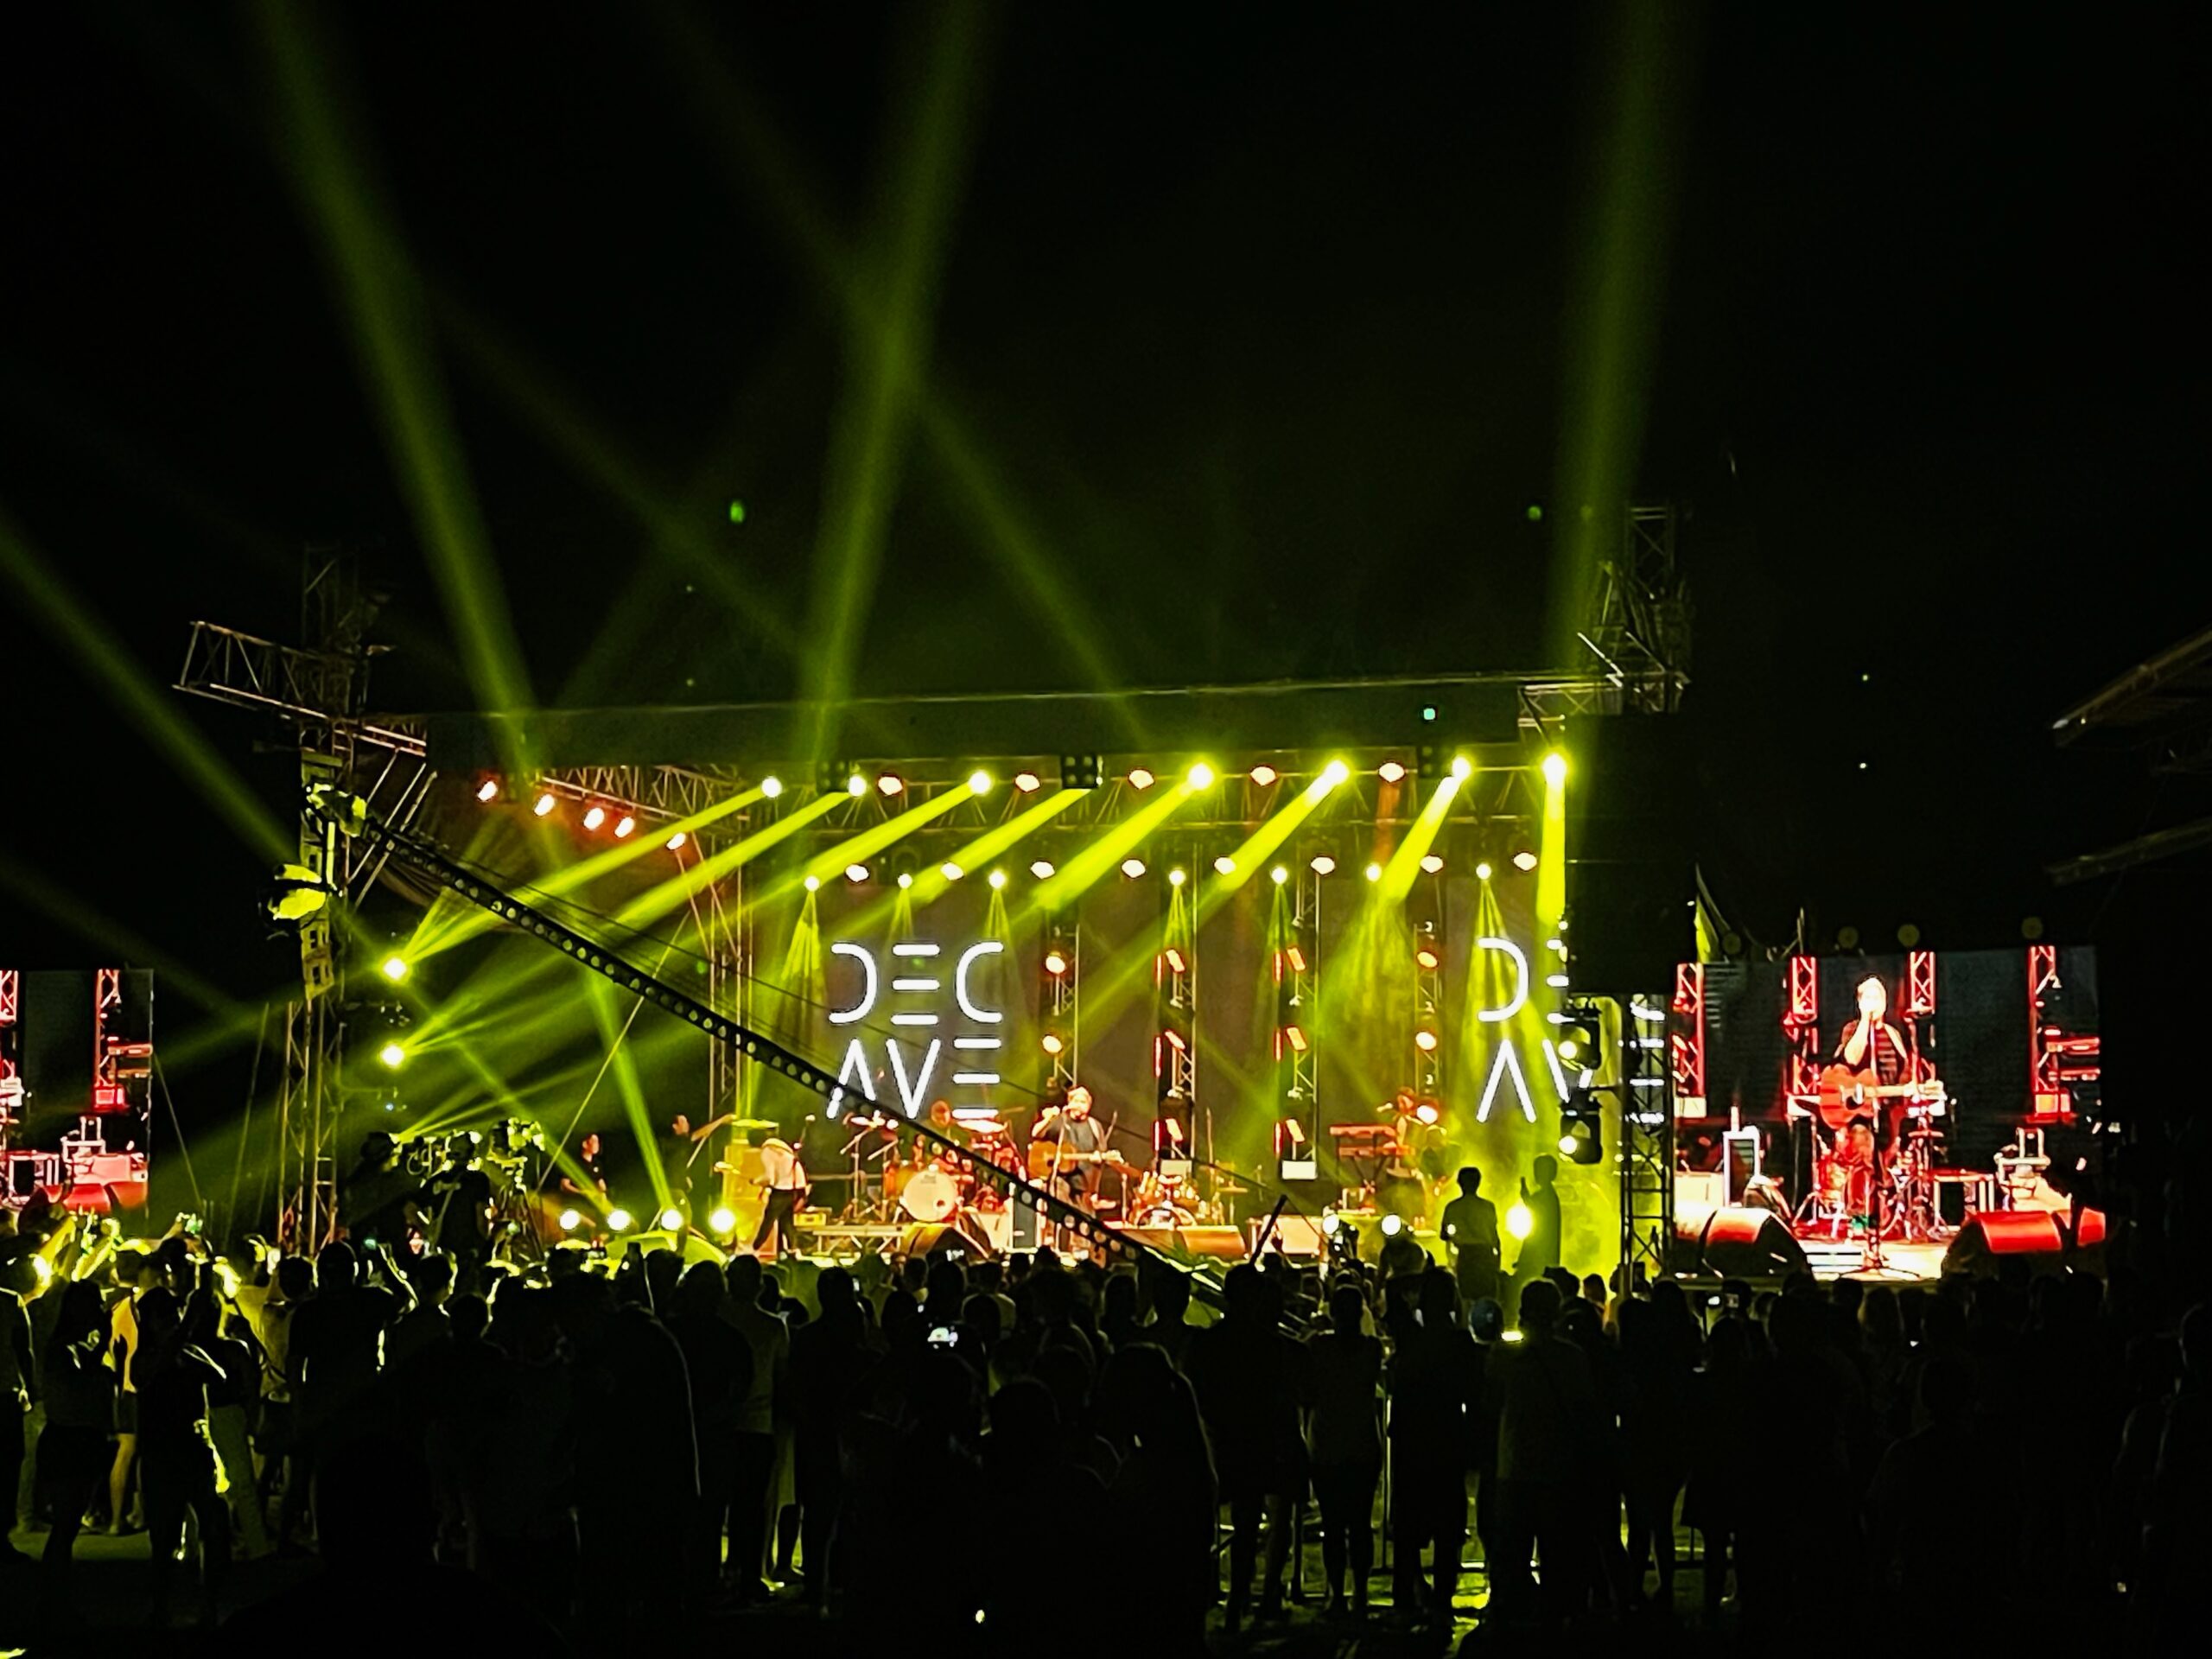 From 3 days to 1 night: Organizers apologize for cutting short Iligan Music Festival